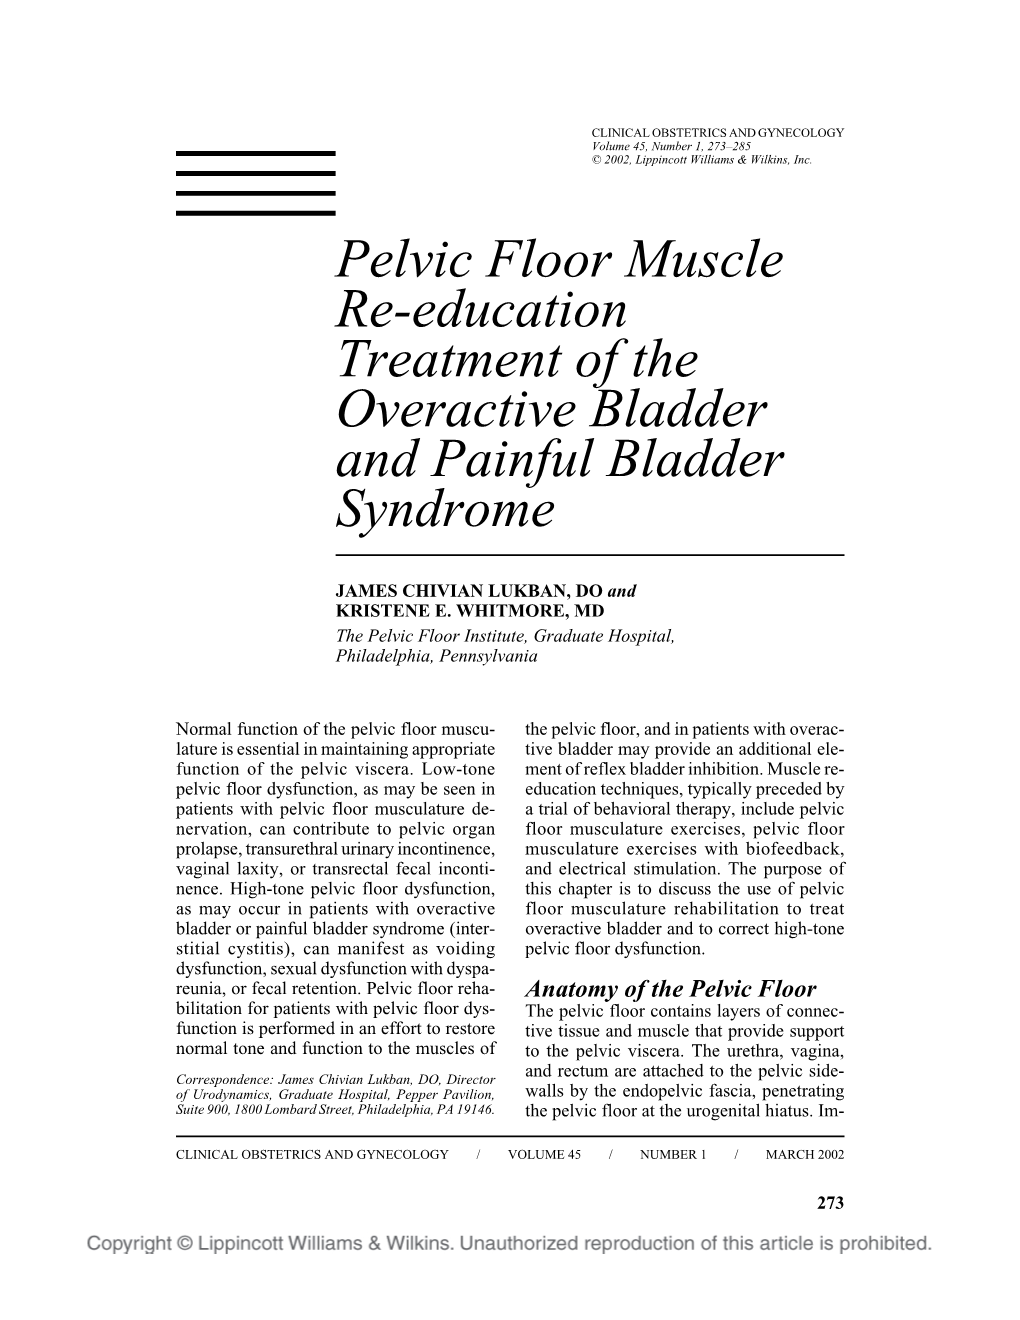 Pelvic Floor Muscle Re-Education Treatment of the Overactive Bladder and Painful Bladder Syndrome